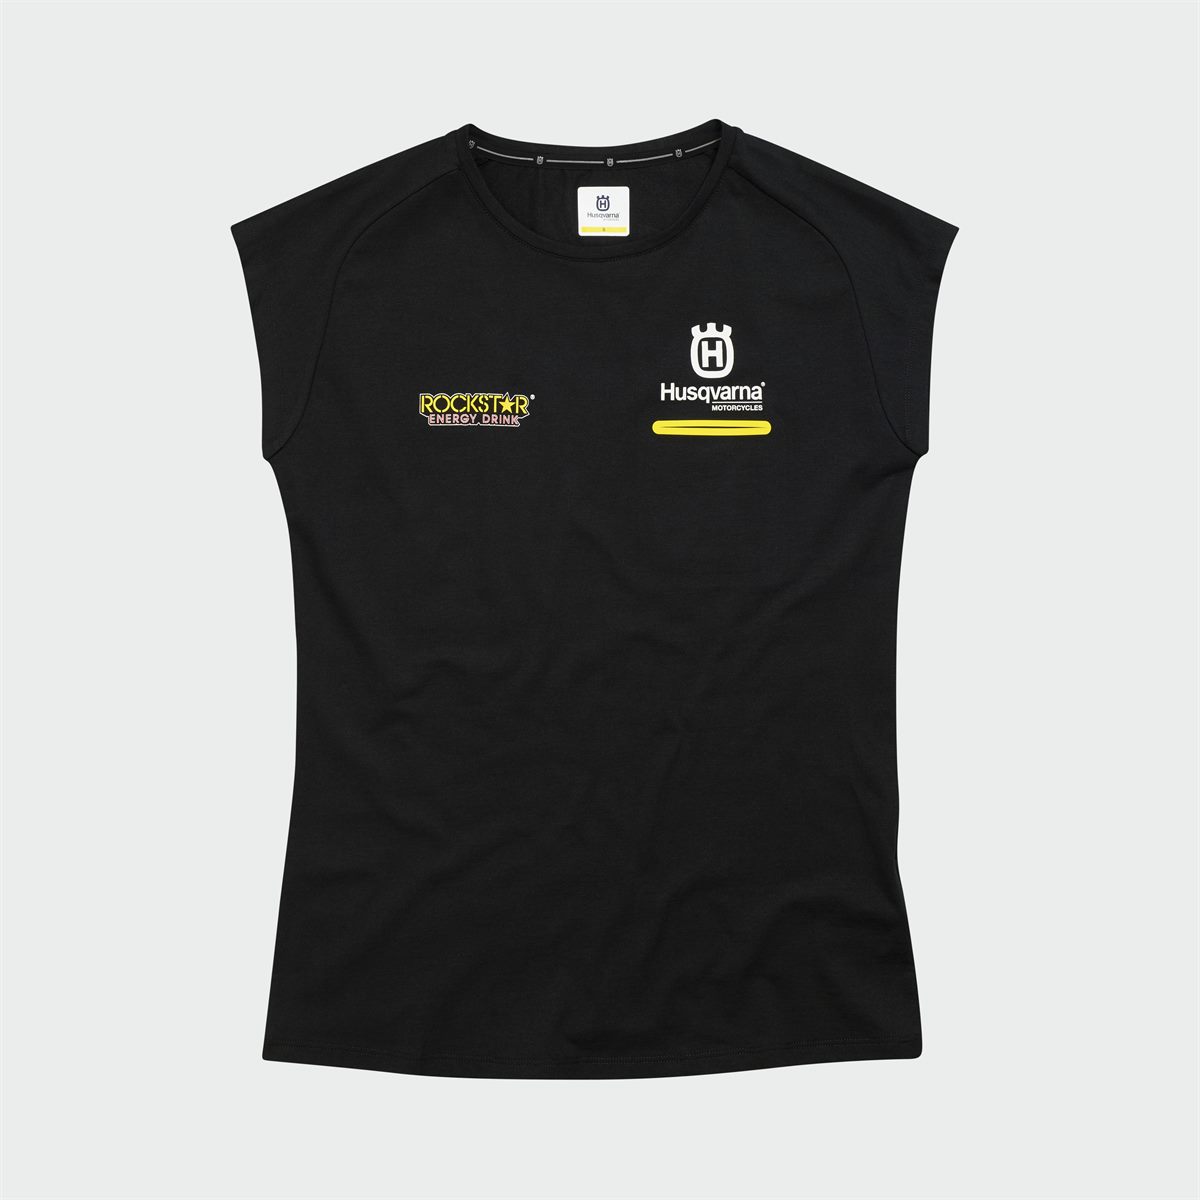 2019 Rockstar Energy Husqvarna Factory Racing Casual Clothing Collection - WOMEN RS TANK TOP